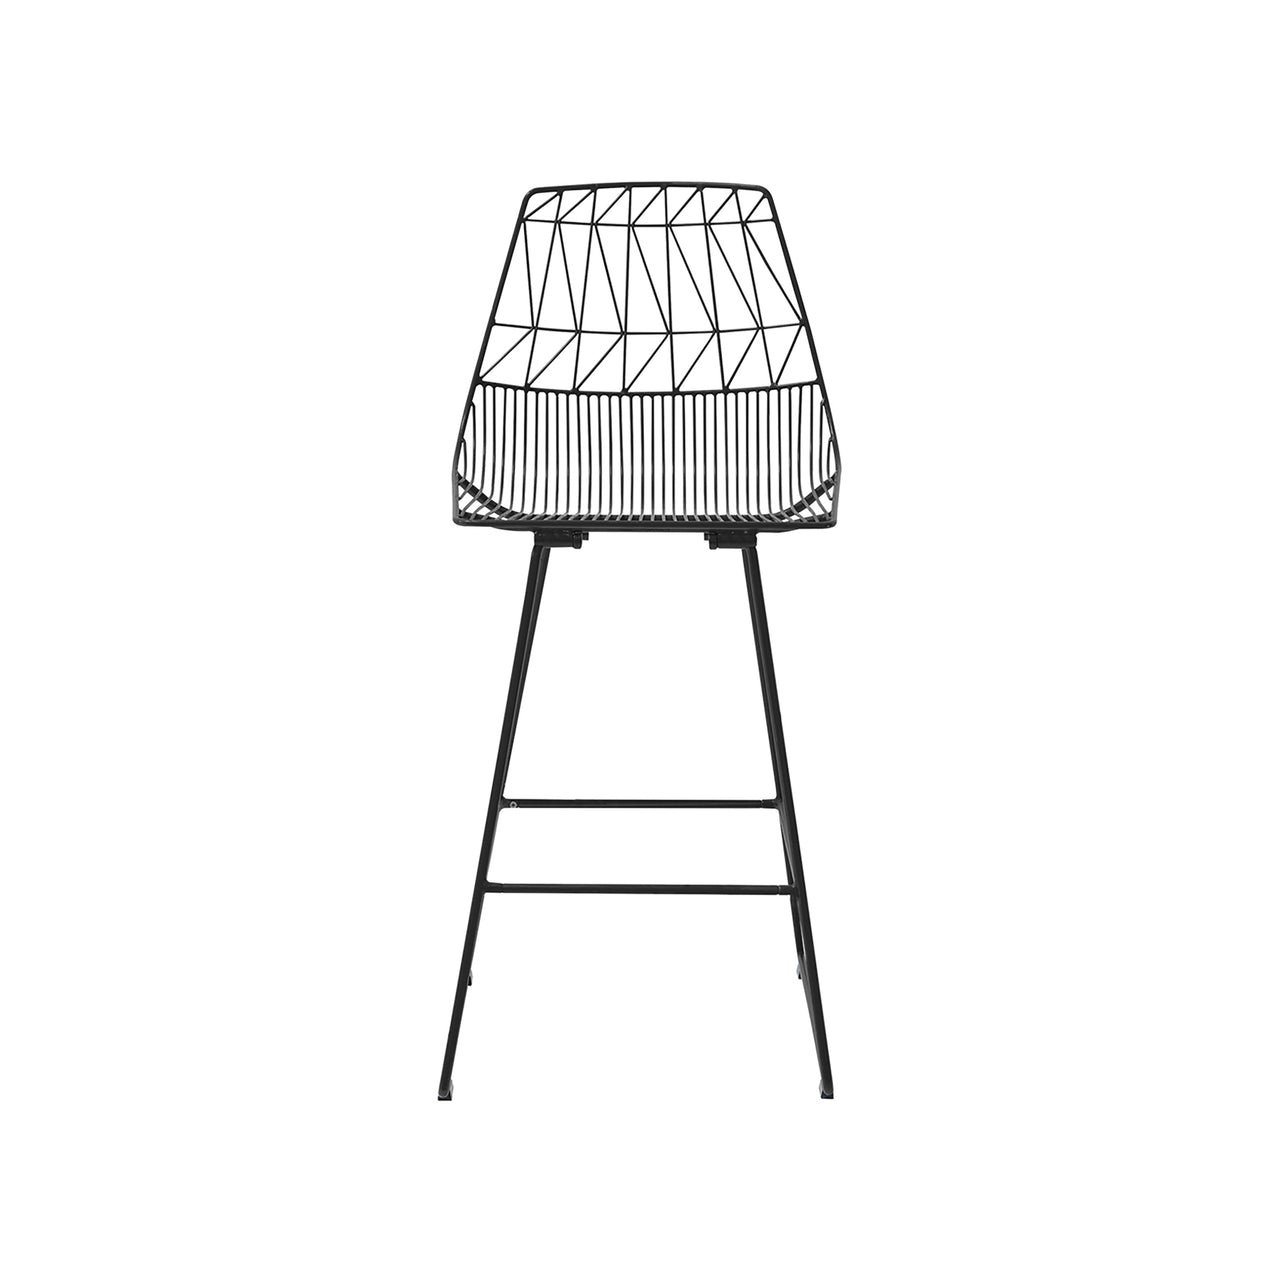 Lucy Bar + Counter Stool: Color + Counter + Black + Without Seat Pad